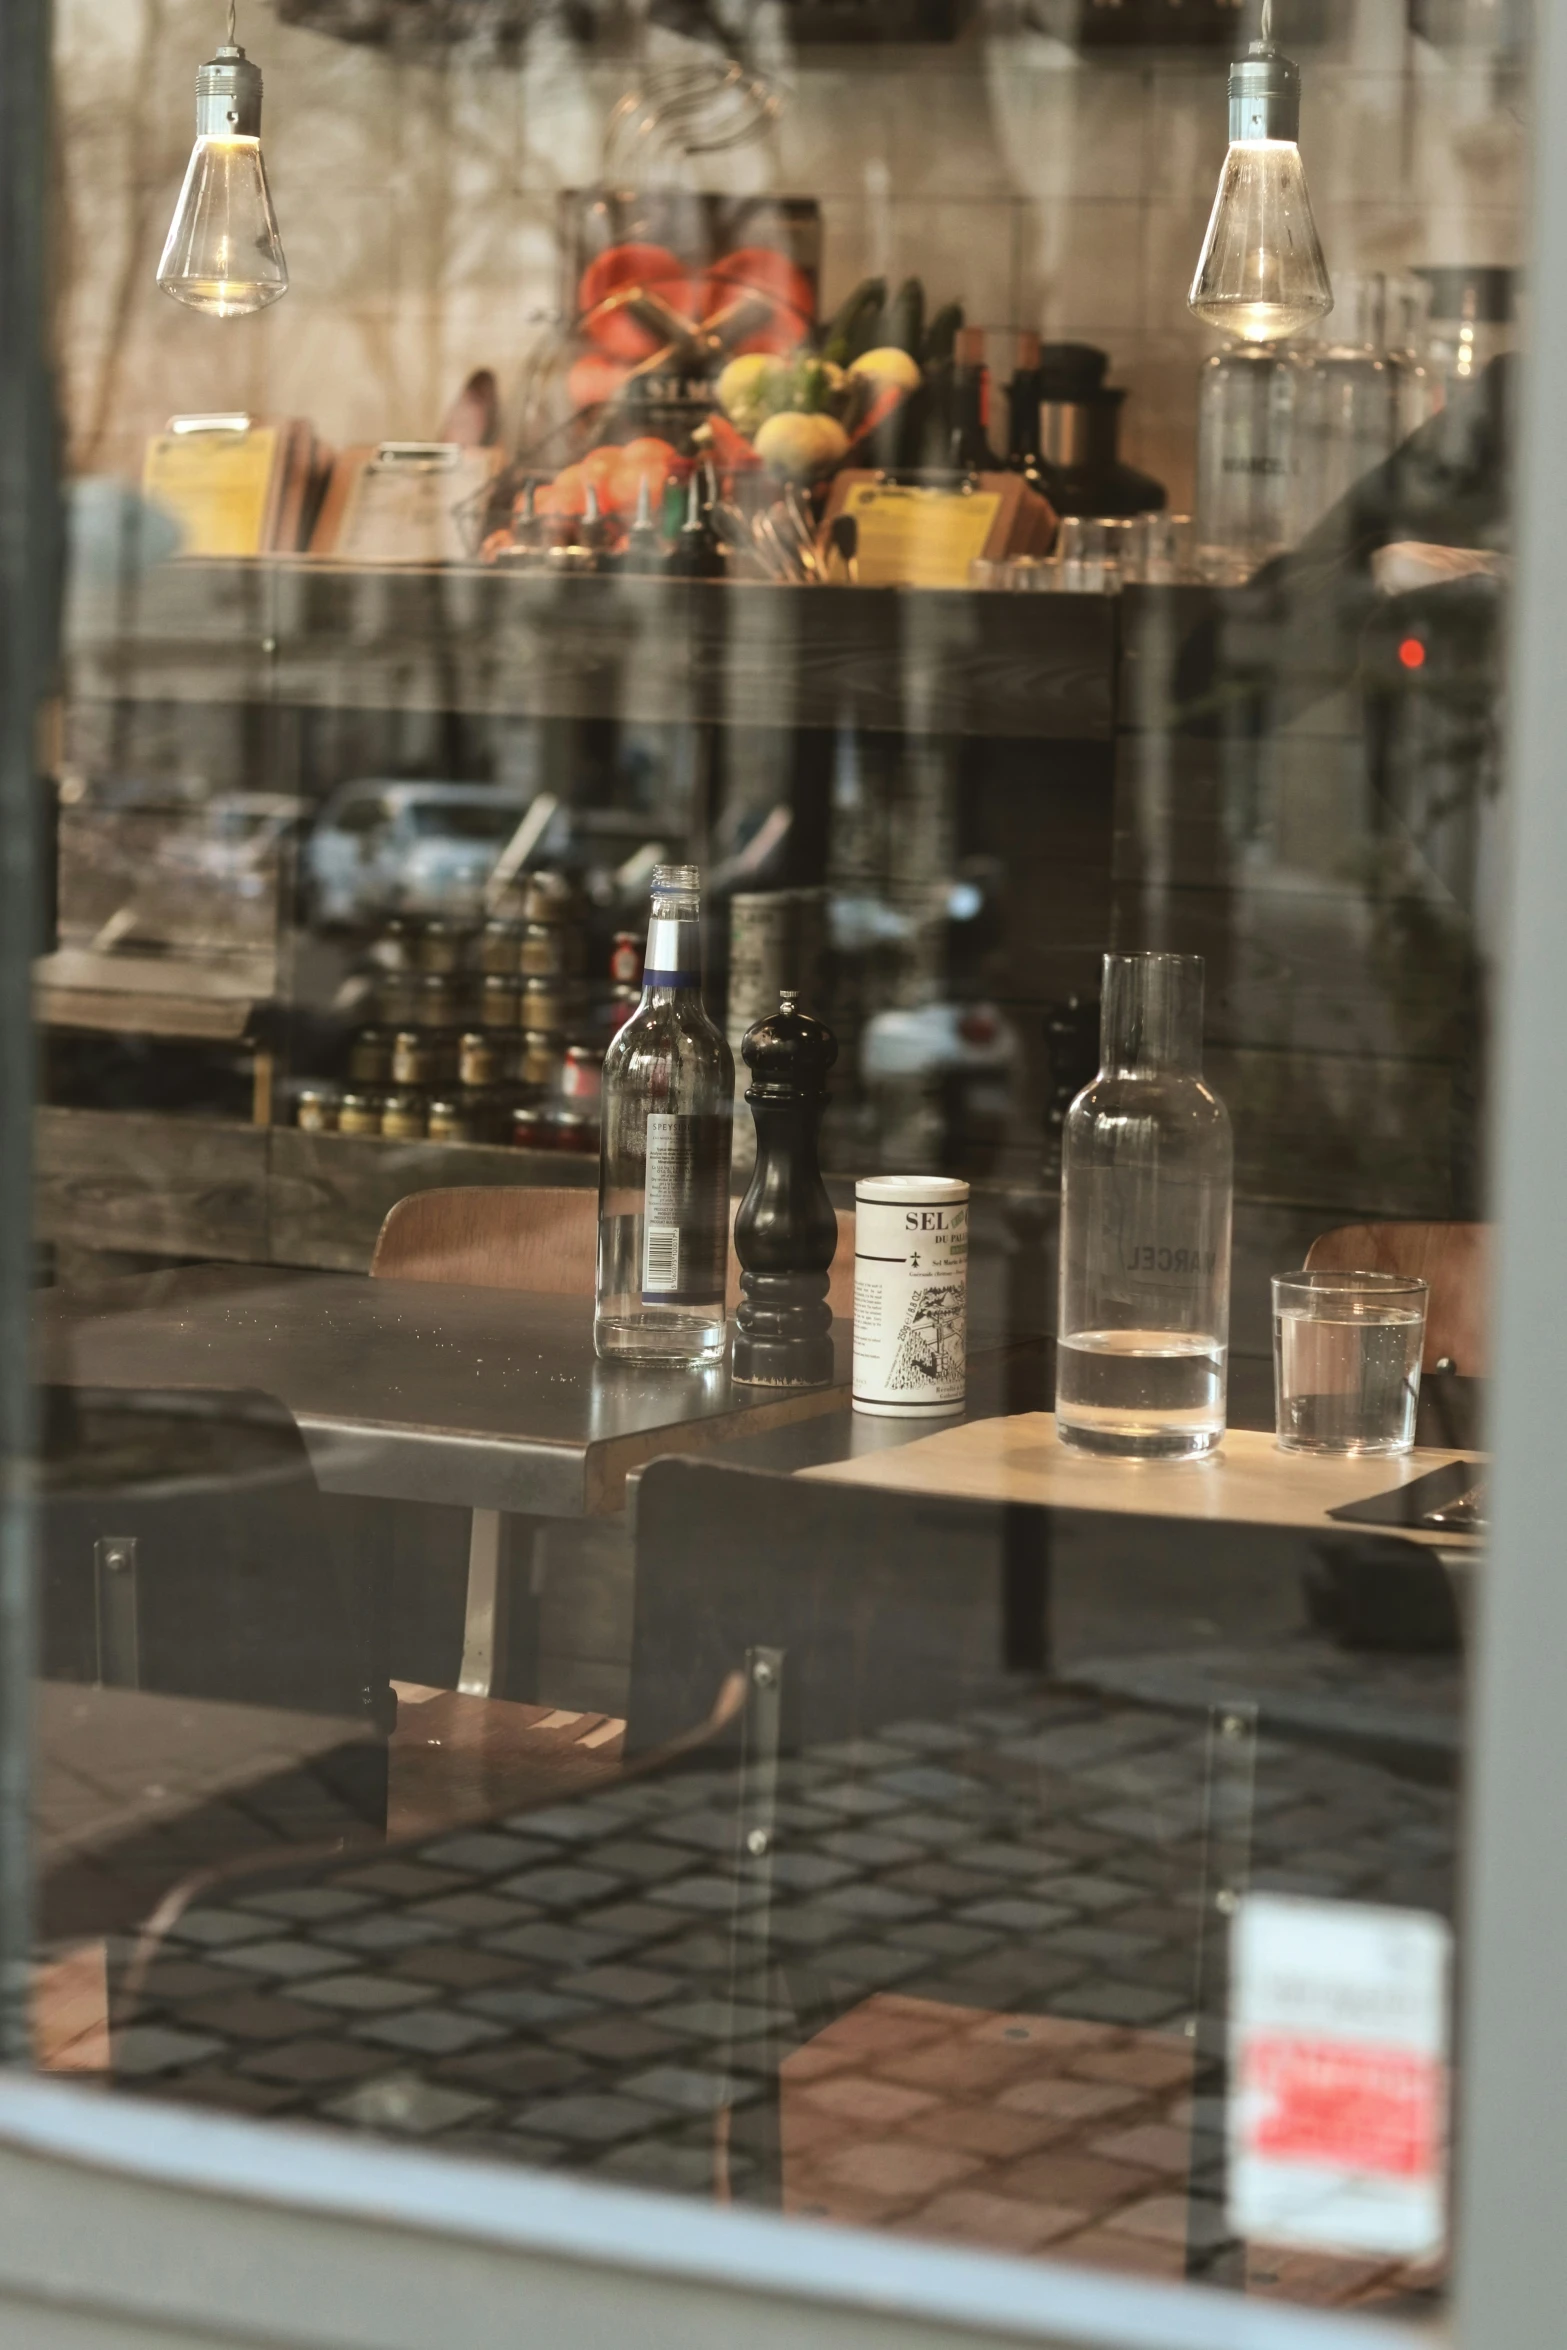 bottles are placed inside the window of an empty restaurant